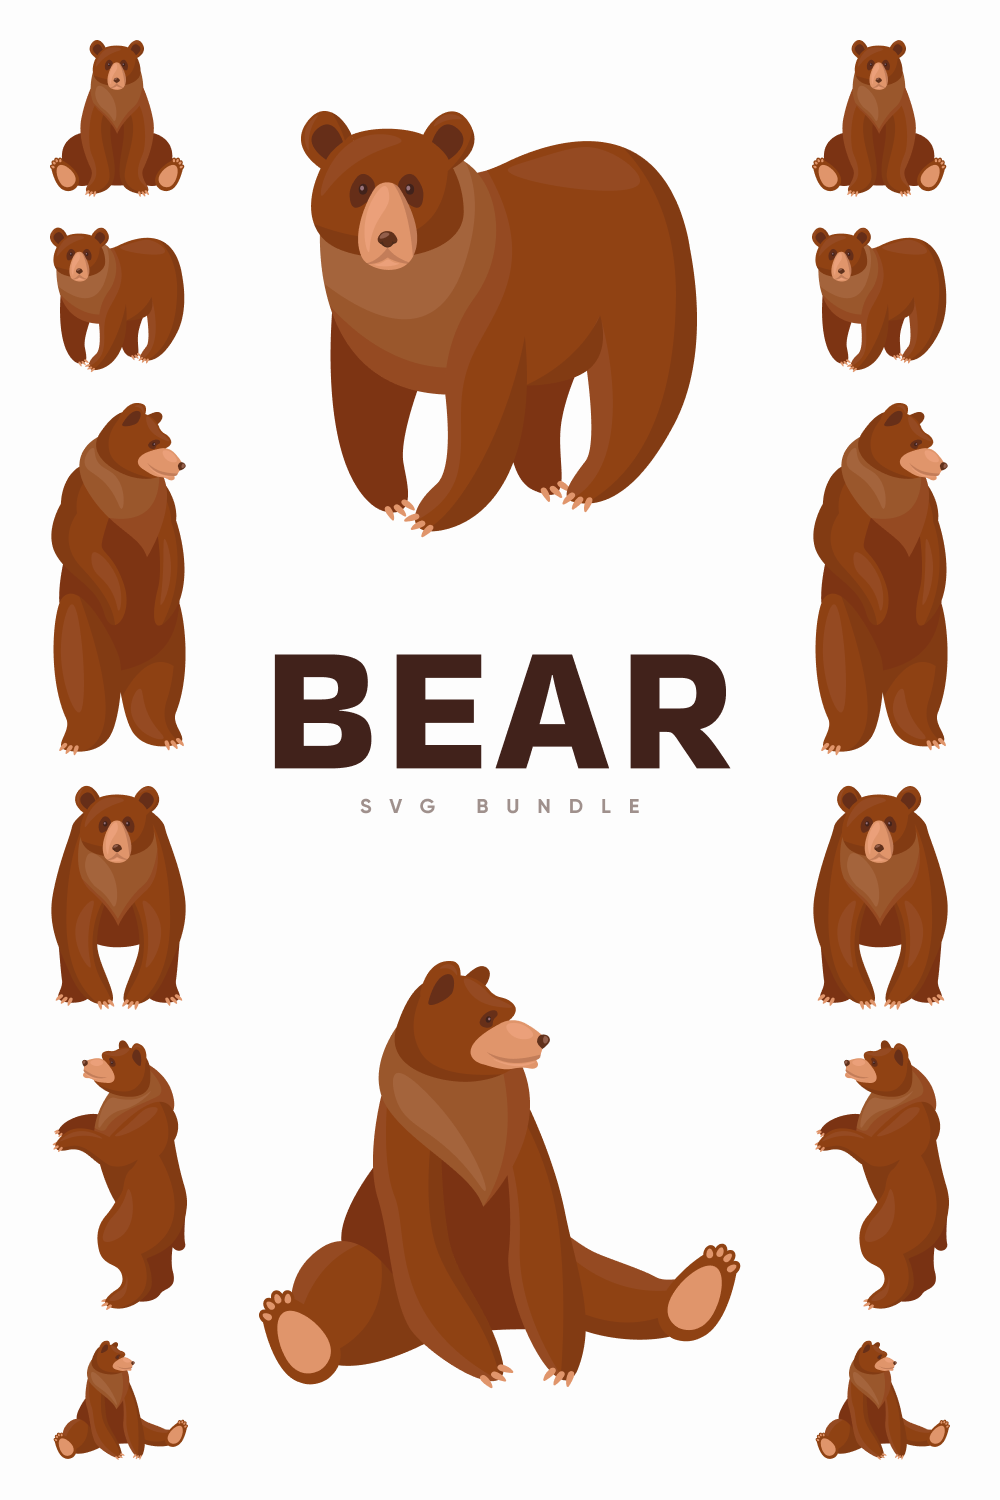 Bear is shown with the words bear on it.